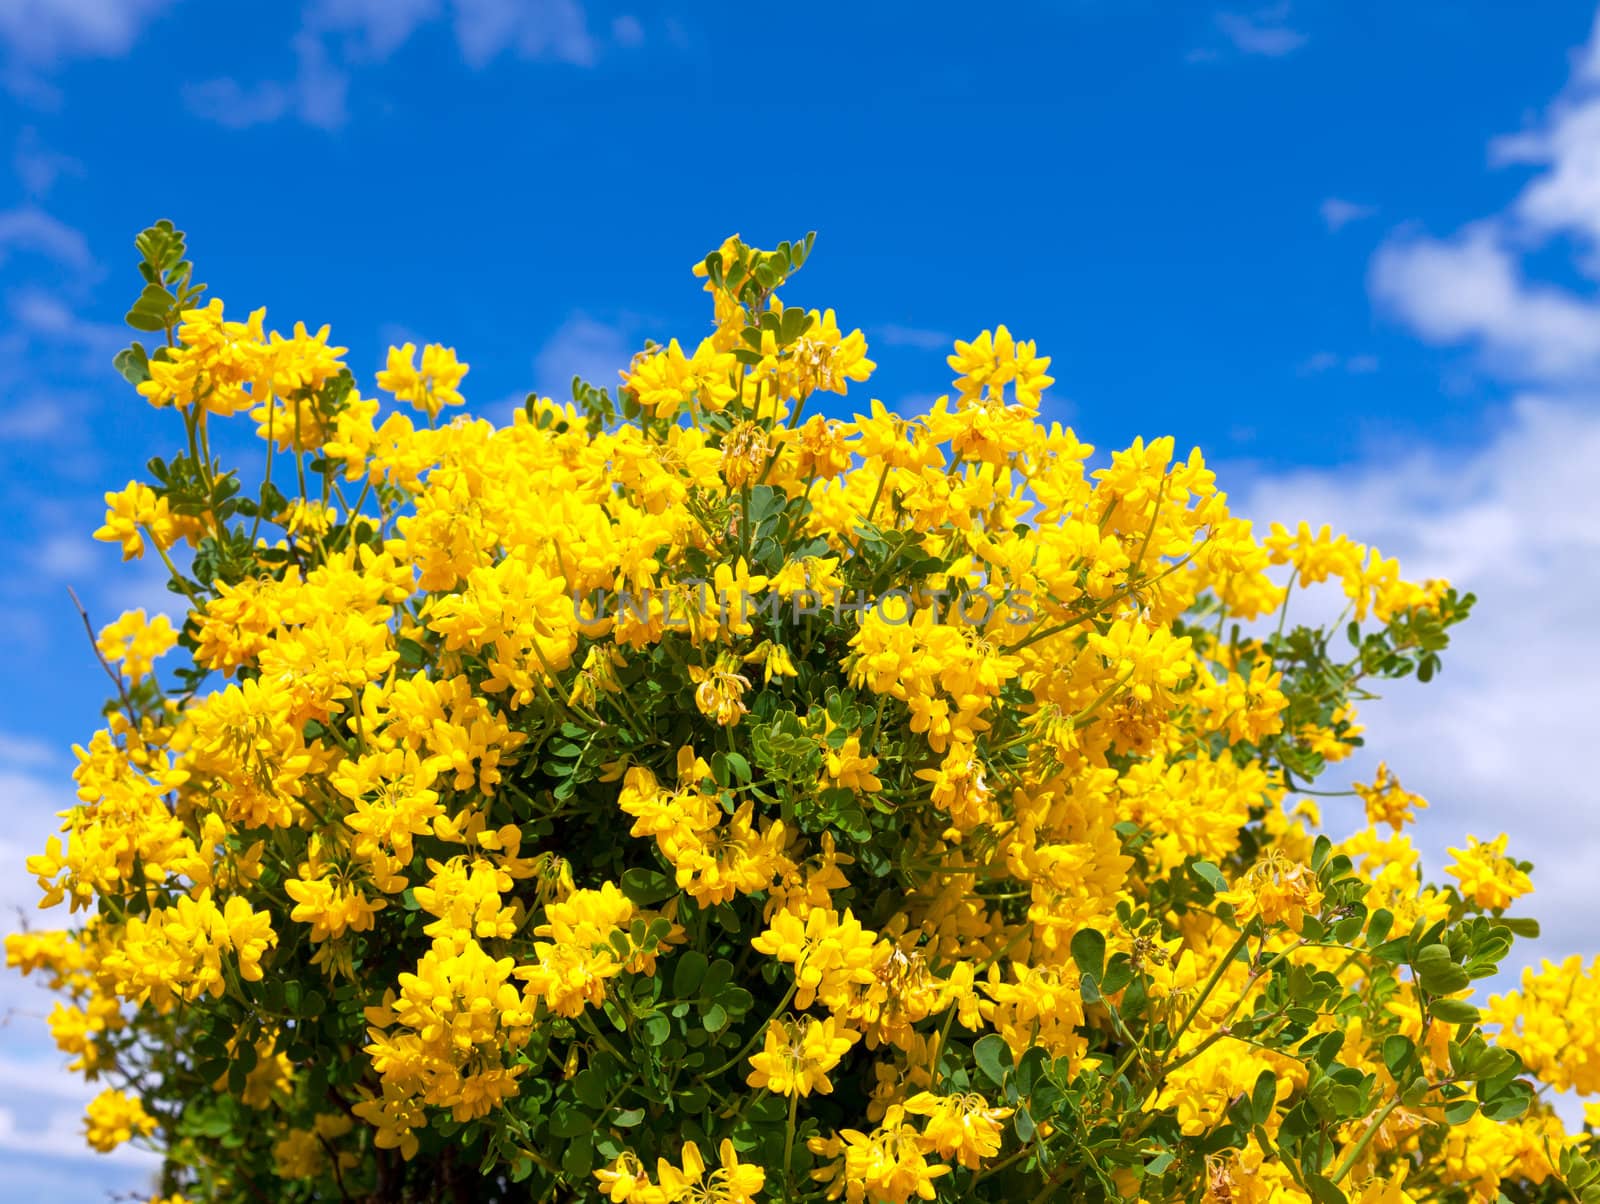 Bush of yellow flowers on a background of blue sky